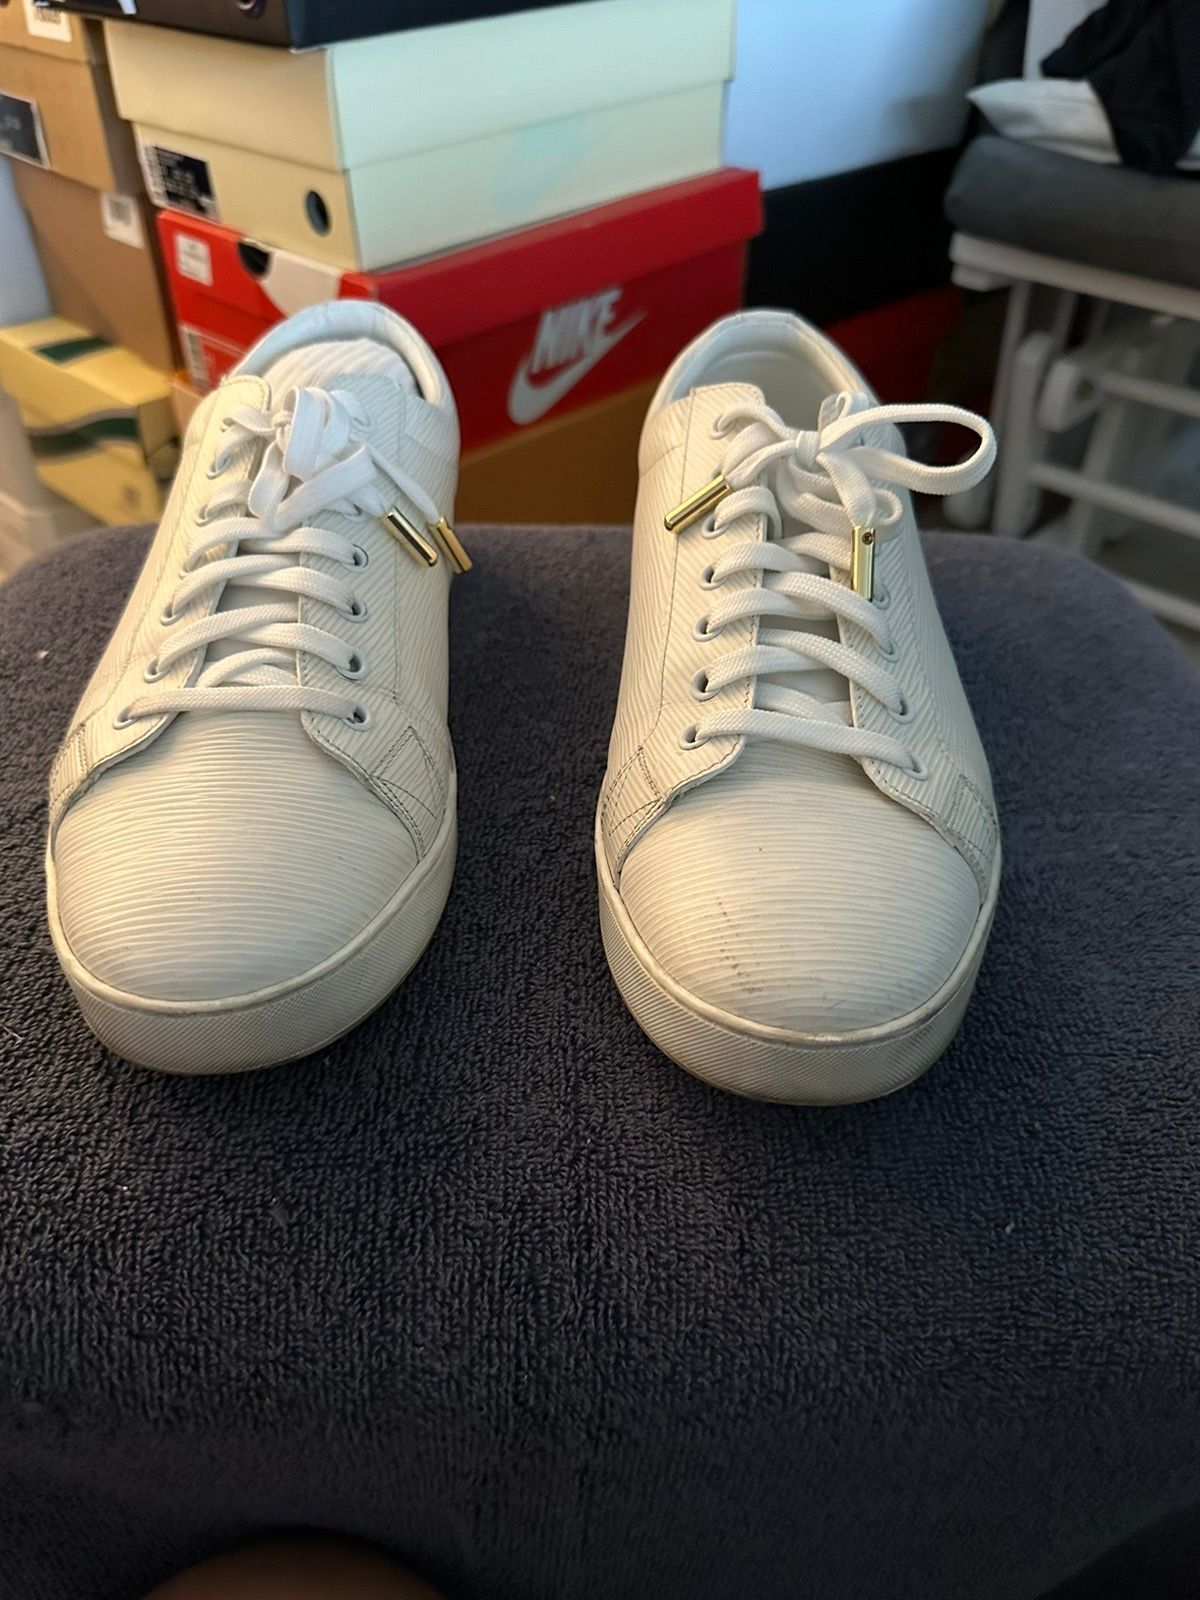 Louis Vuitton Cream Epi Leather Match Up Sneakers Size 40.5 at